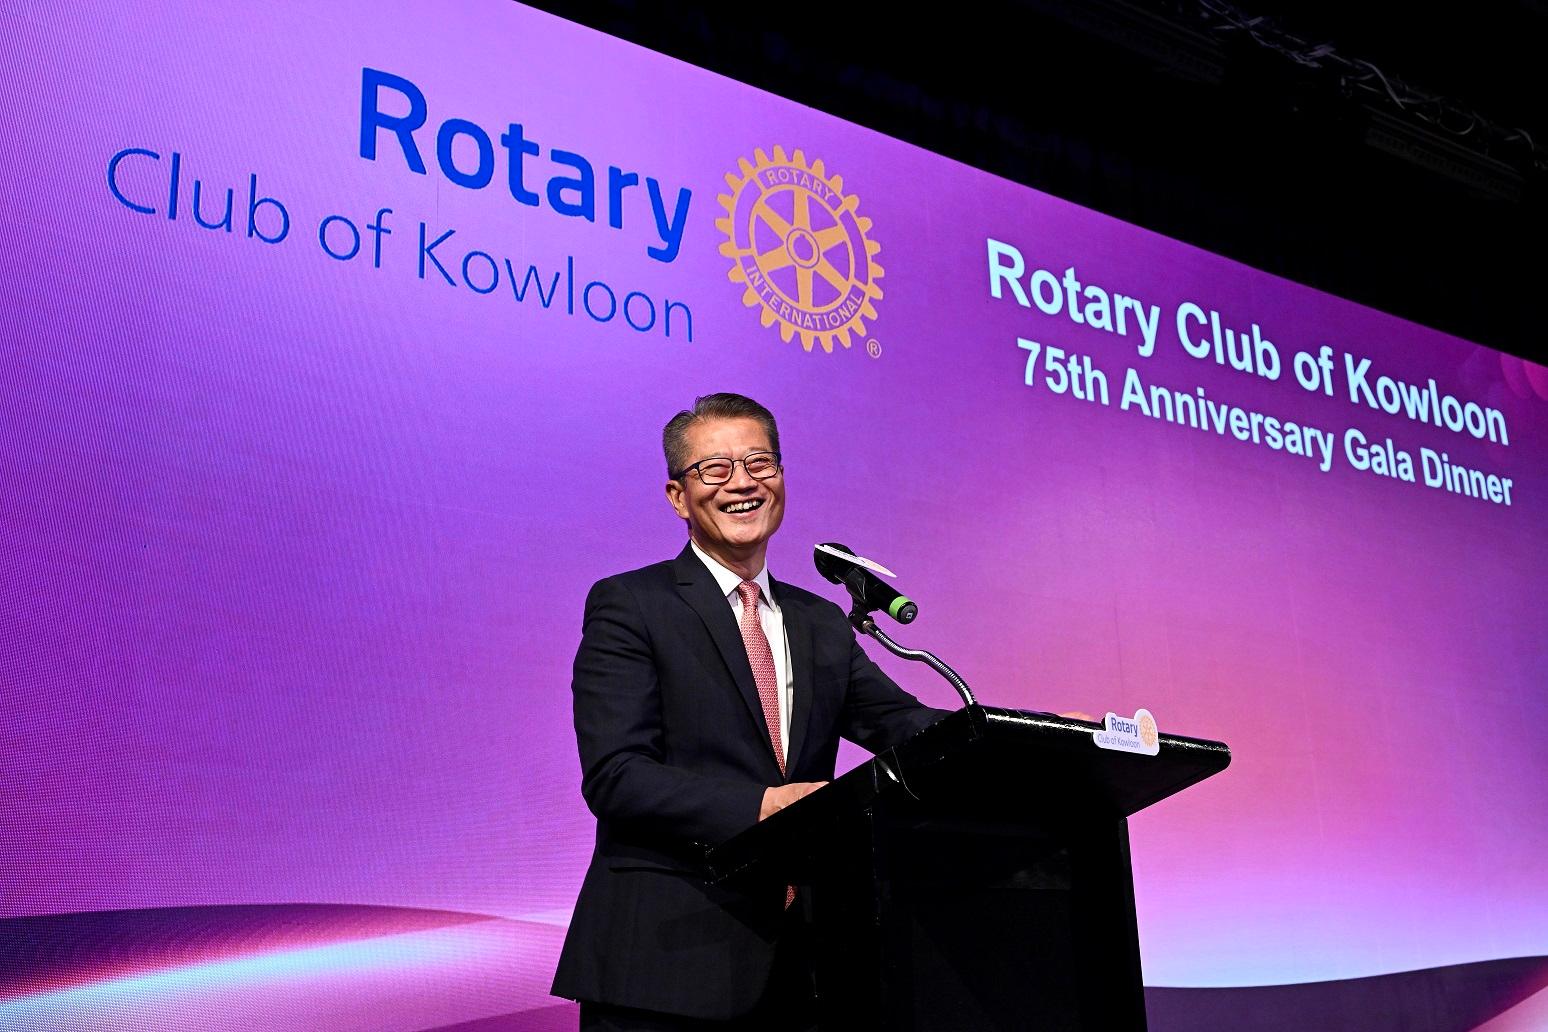 The Financial Secretary, Mr Paul Chan, speaks at the 75th Anniversary Gala Dinner of the Rotary Club of Kowloon today (May 12).